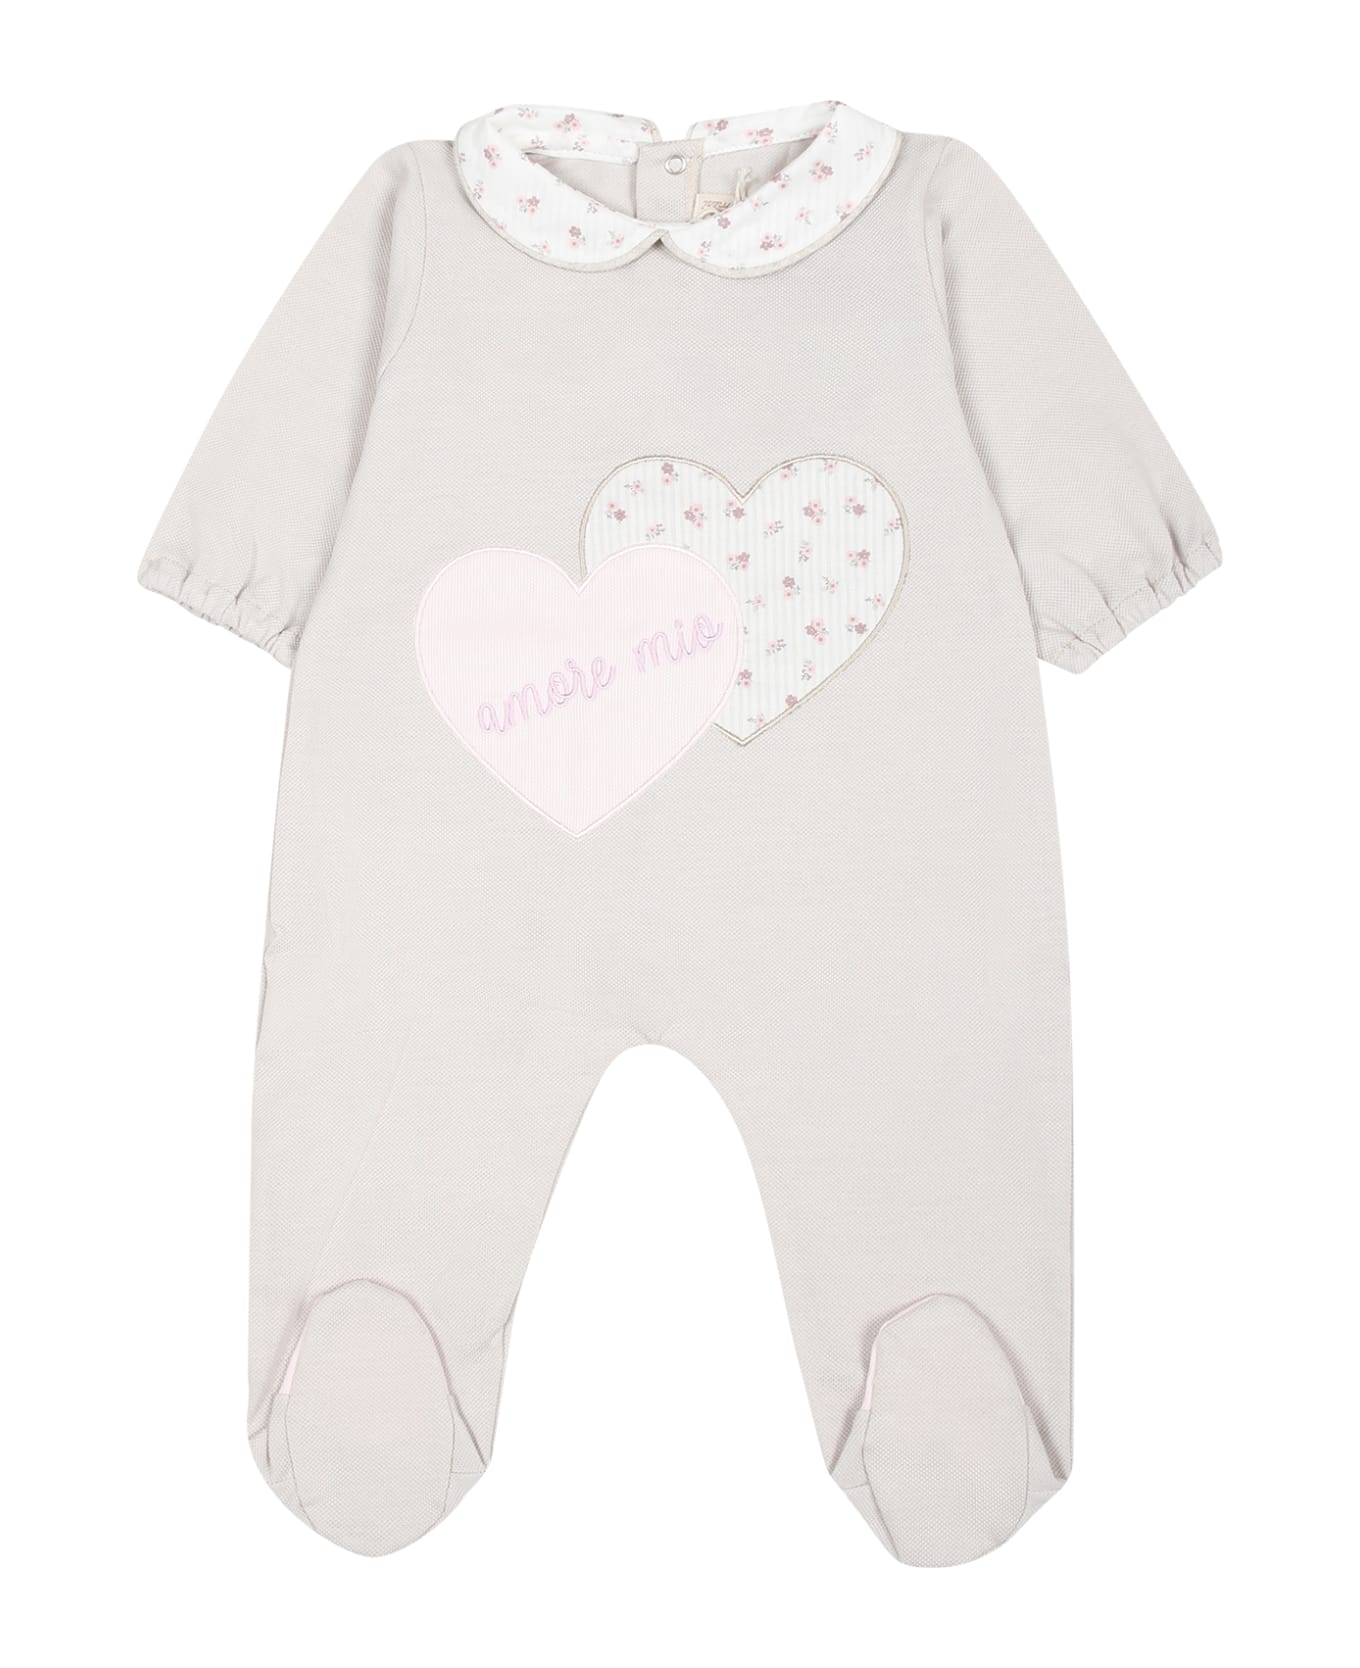 La stupenderia Beige Babygrow For Baby Girl With Hearts And Writing - Beige